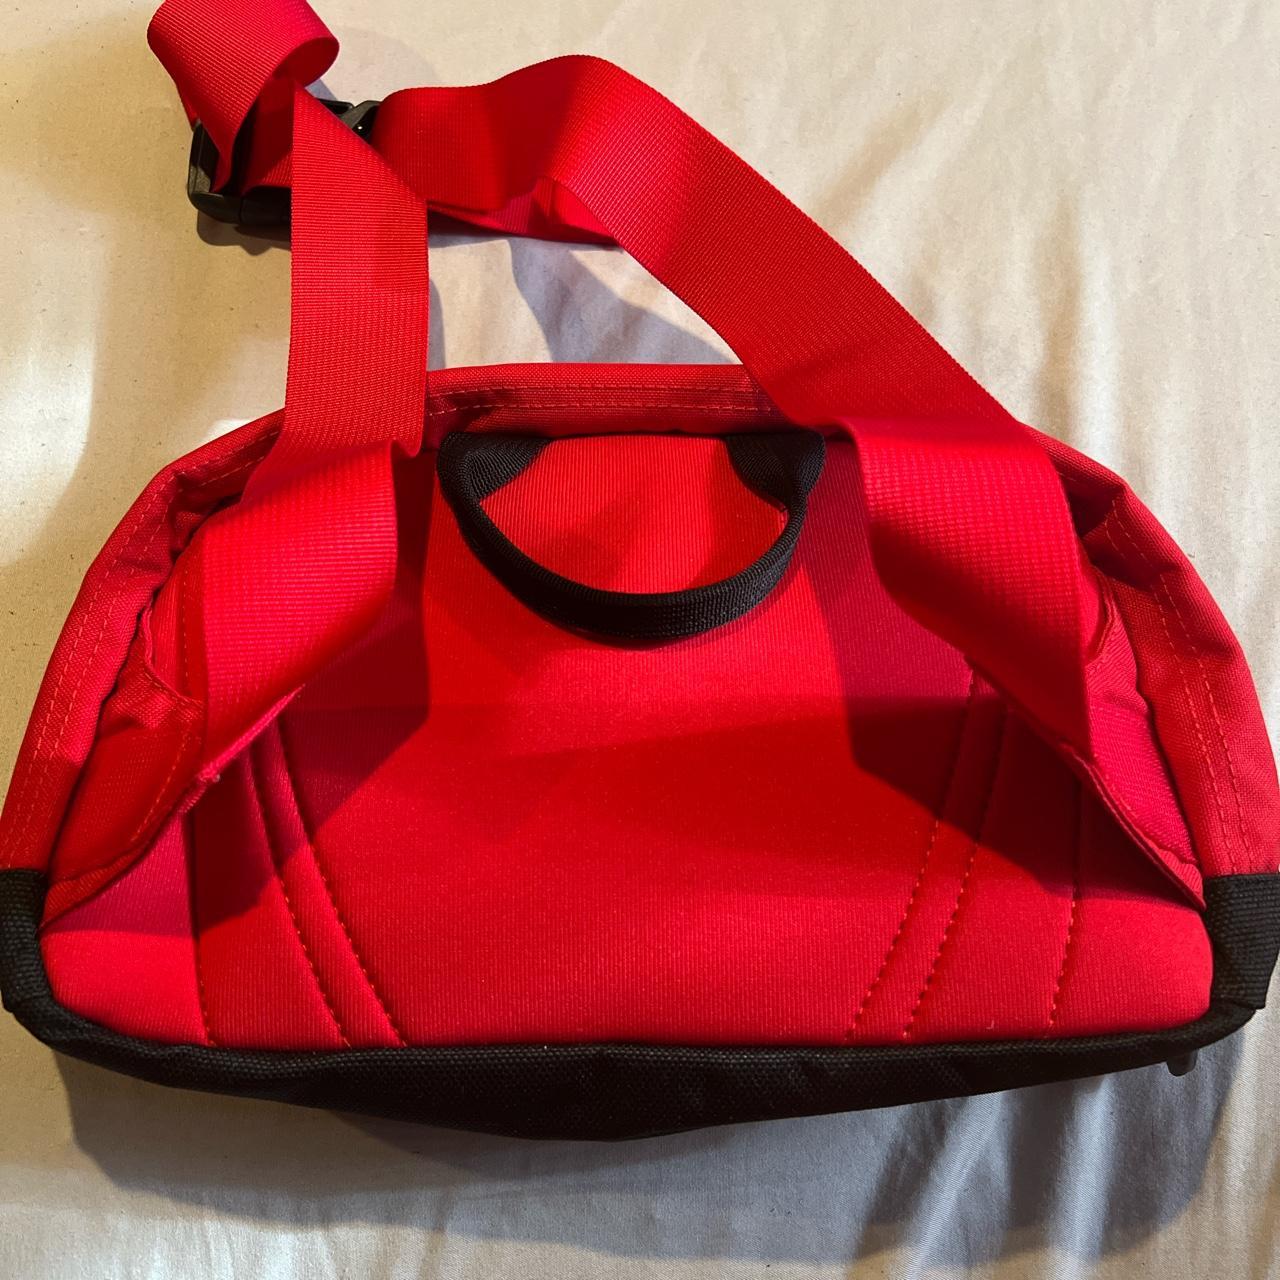 The North Face Men's Red and Black Bag (4)